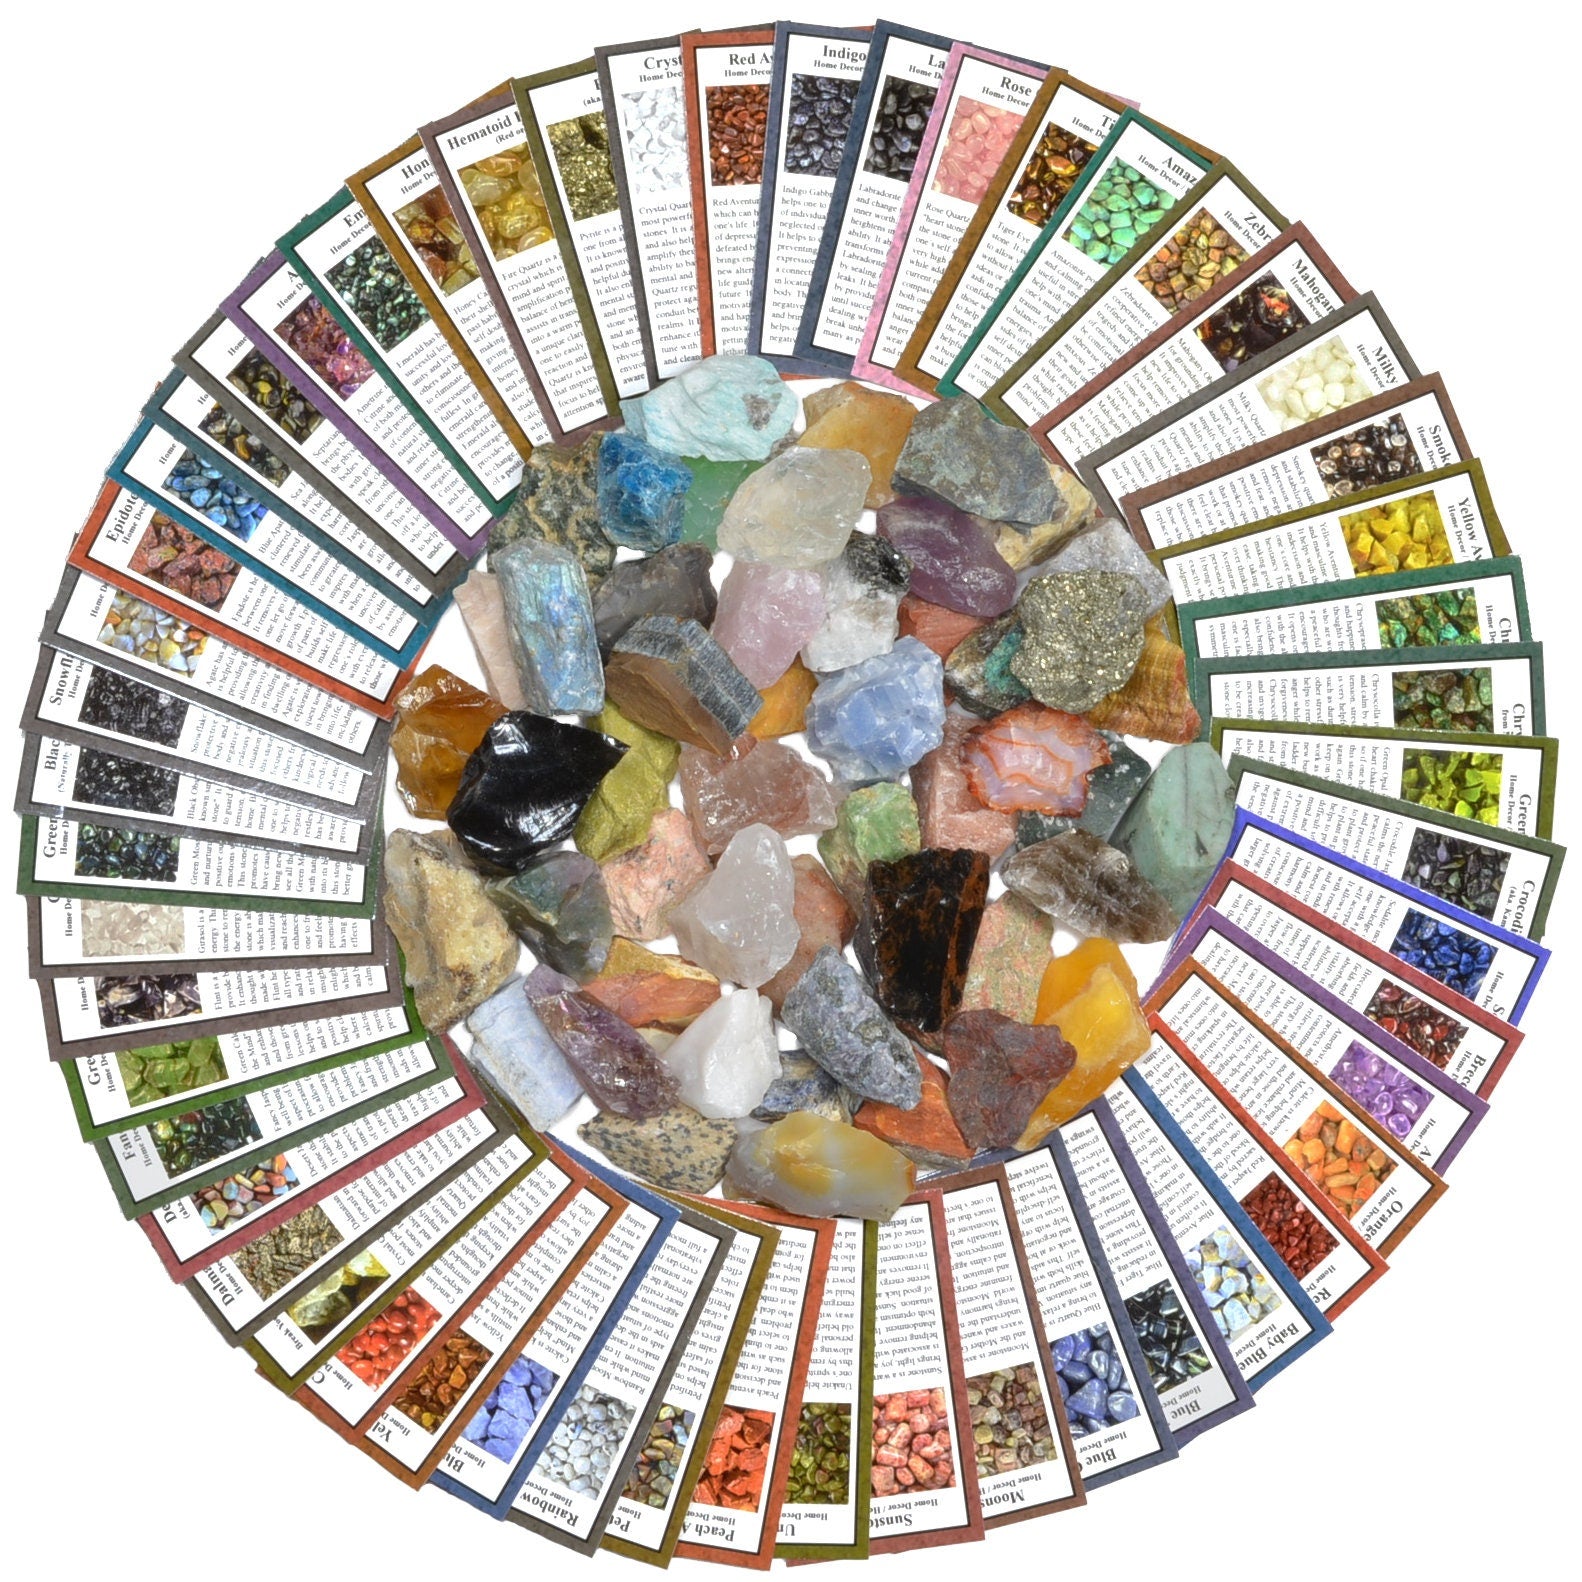 50 Different Rough Stones with Identification Cards - The Best Starter Rock Collection and Activity Kit! - DukeCityHerbs